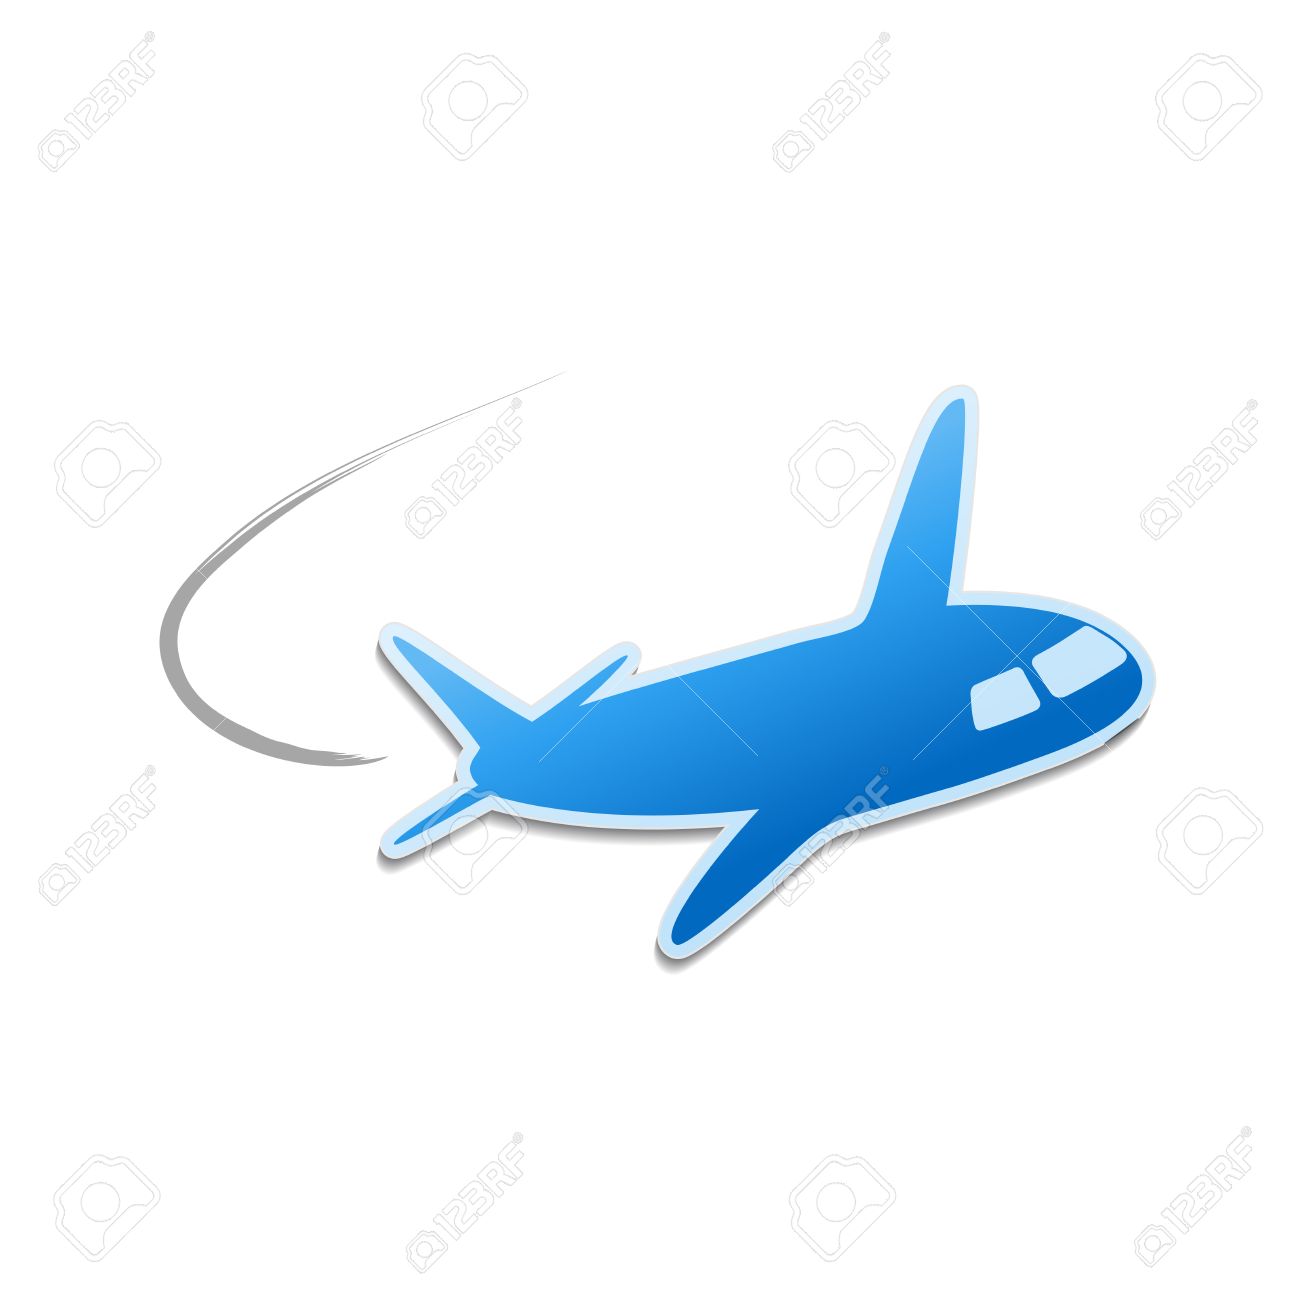 Flying plane sign. side view. flat style black icon on vectors 